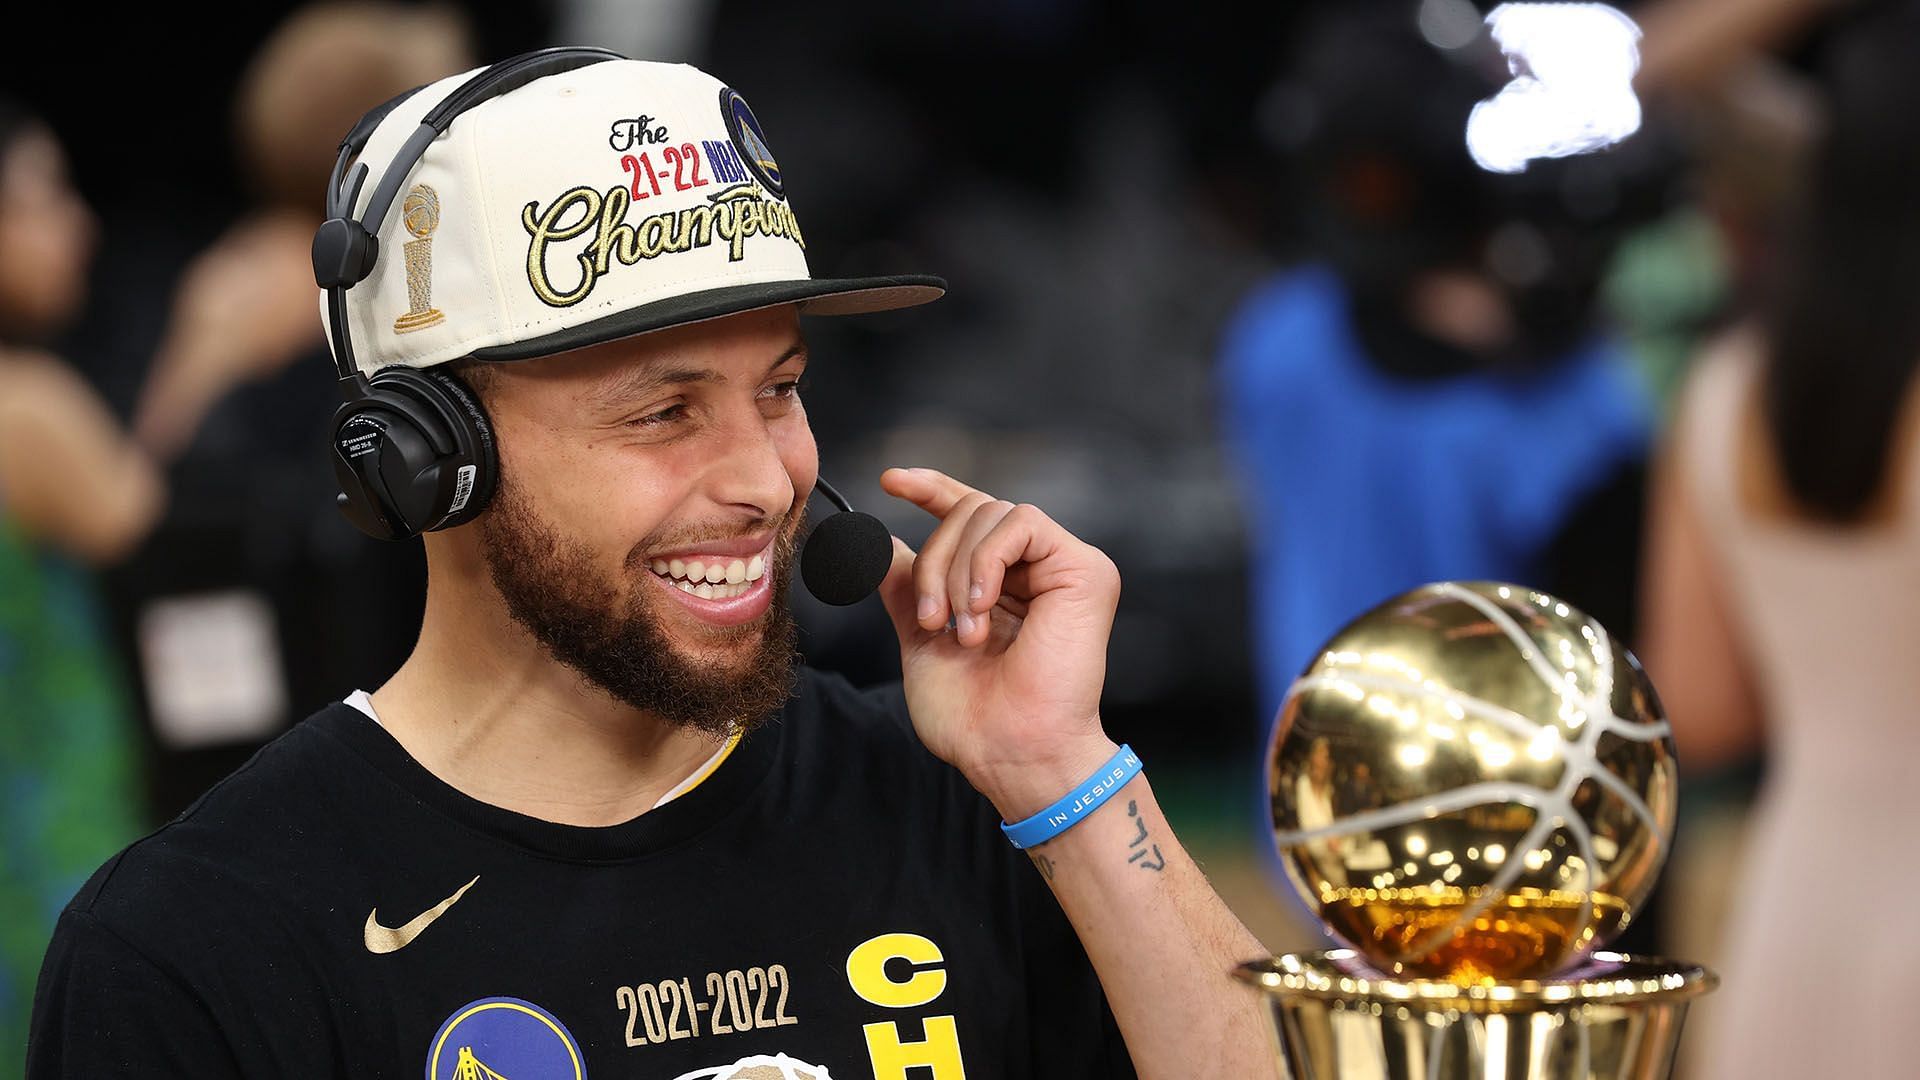 Steph Curry has pushed himself into conversations of the top-10 best players of all-time. [Photo: NBA.com]